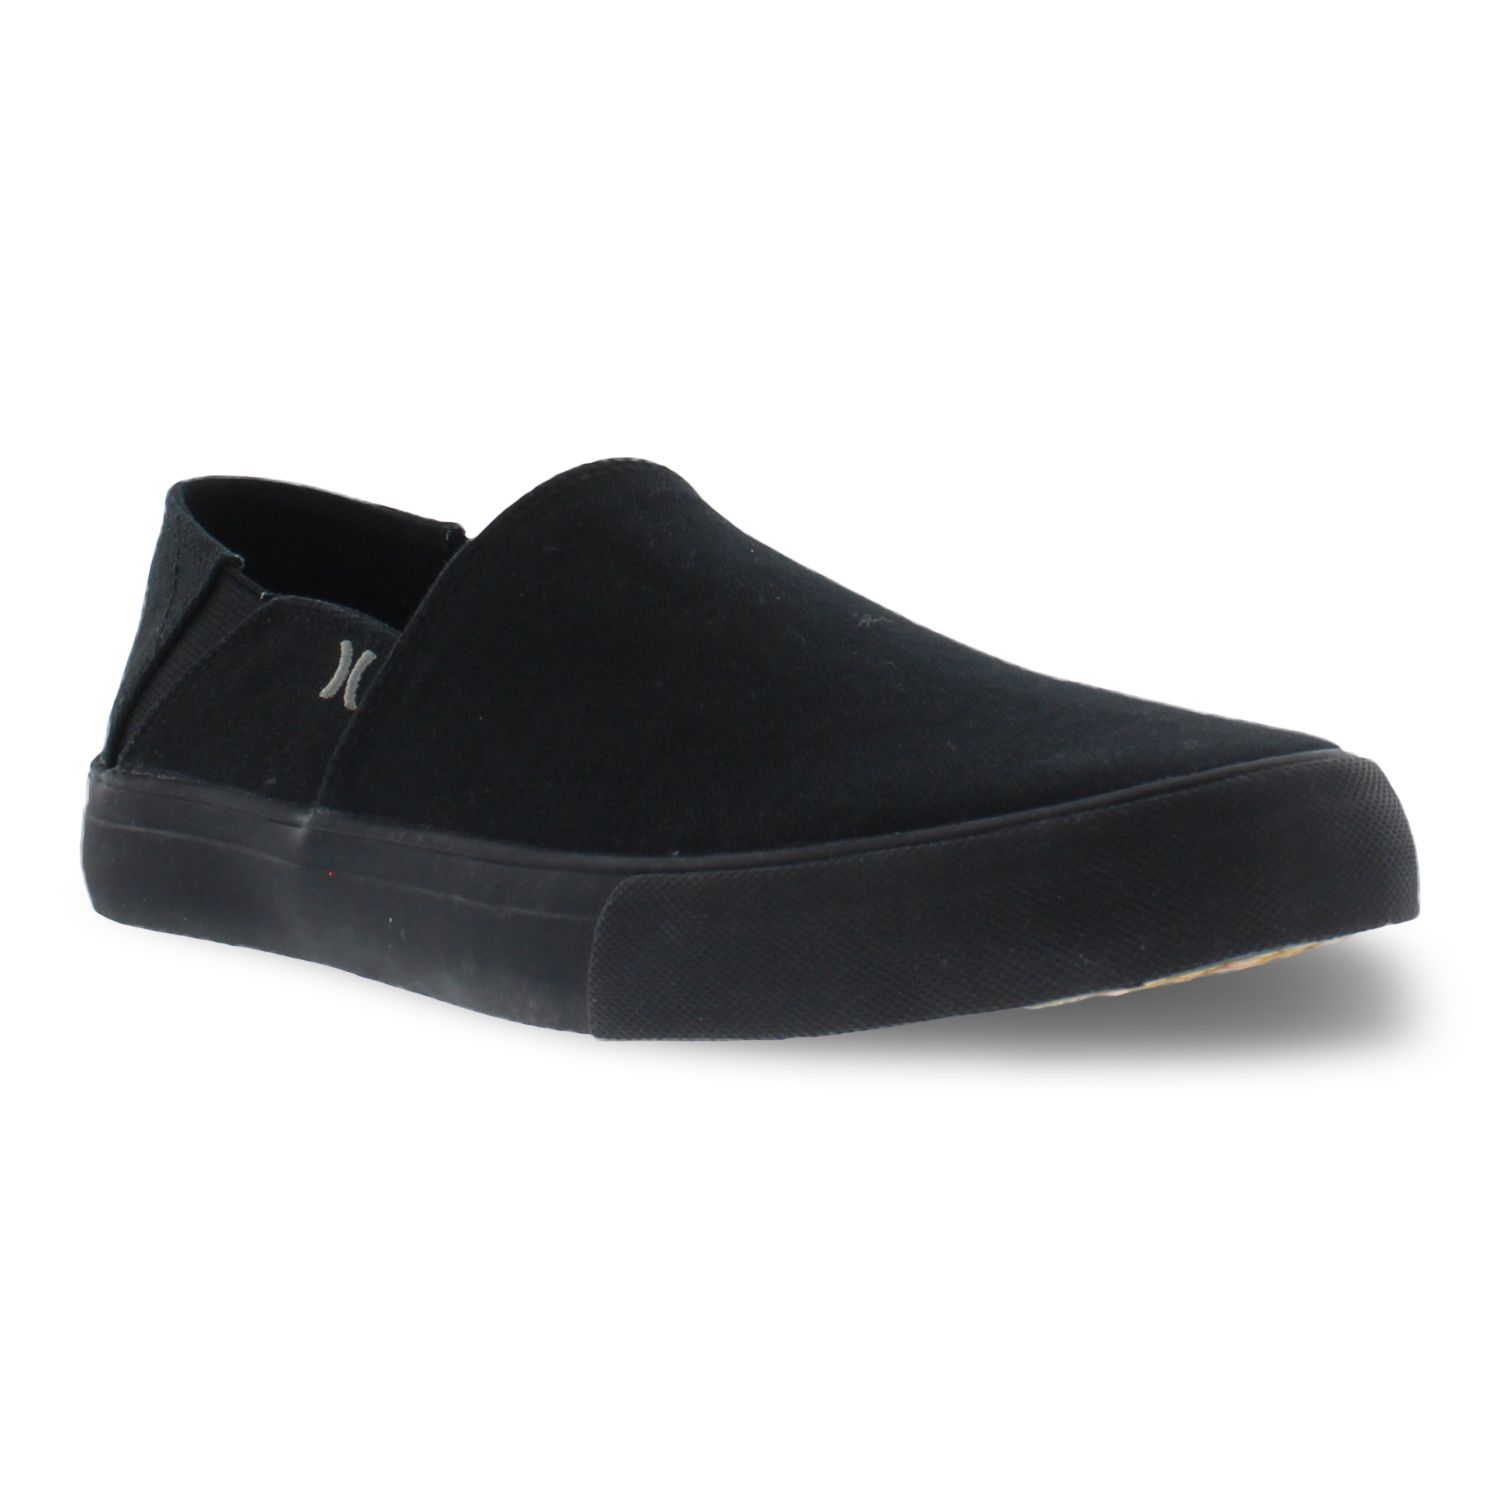 hurley slip on shoes